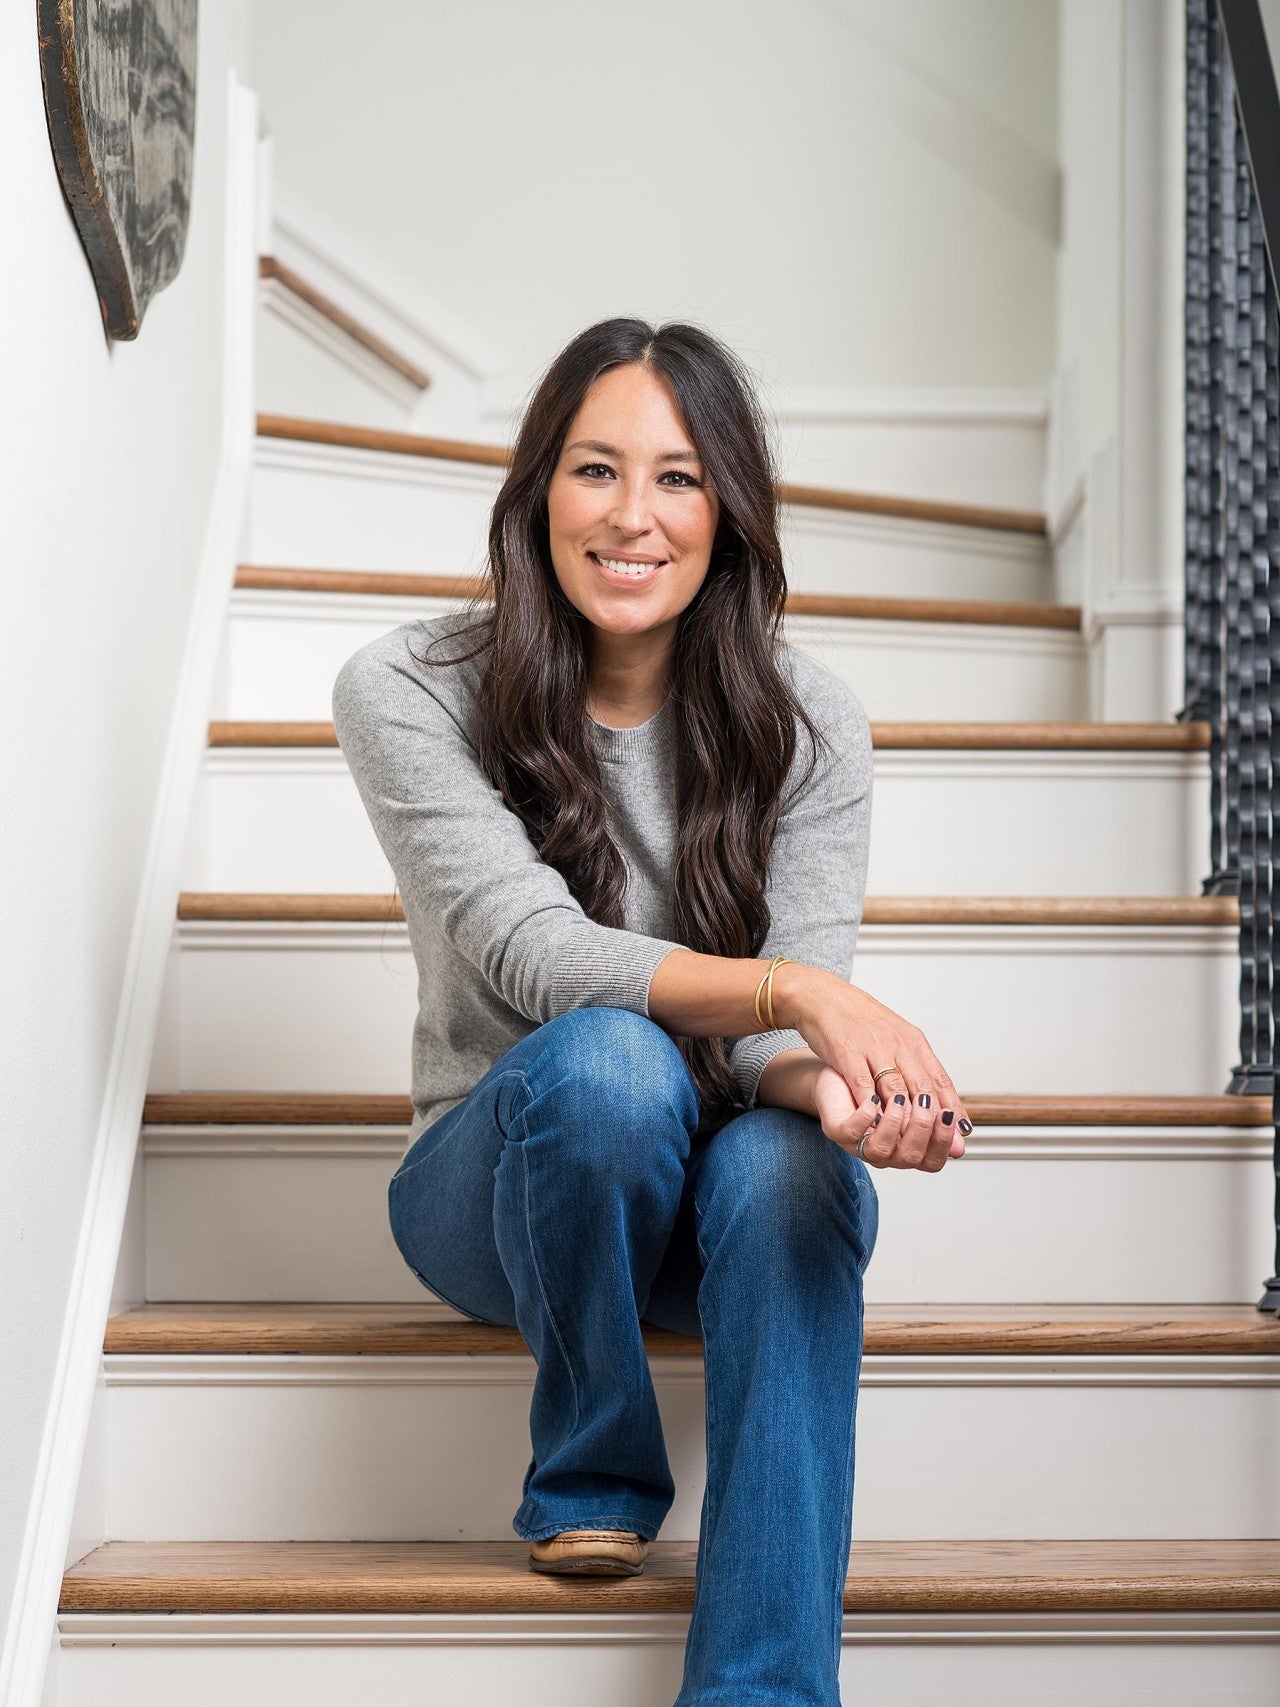 Joanna Gaines Shares the #1 Decorating Mistake People Make